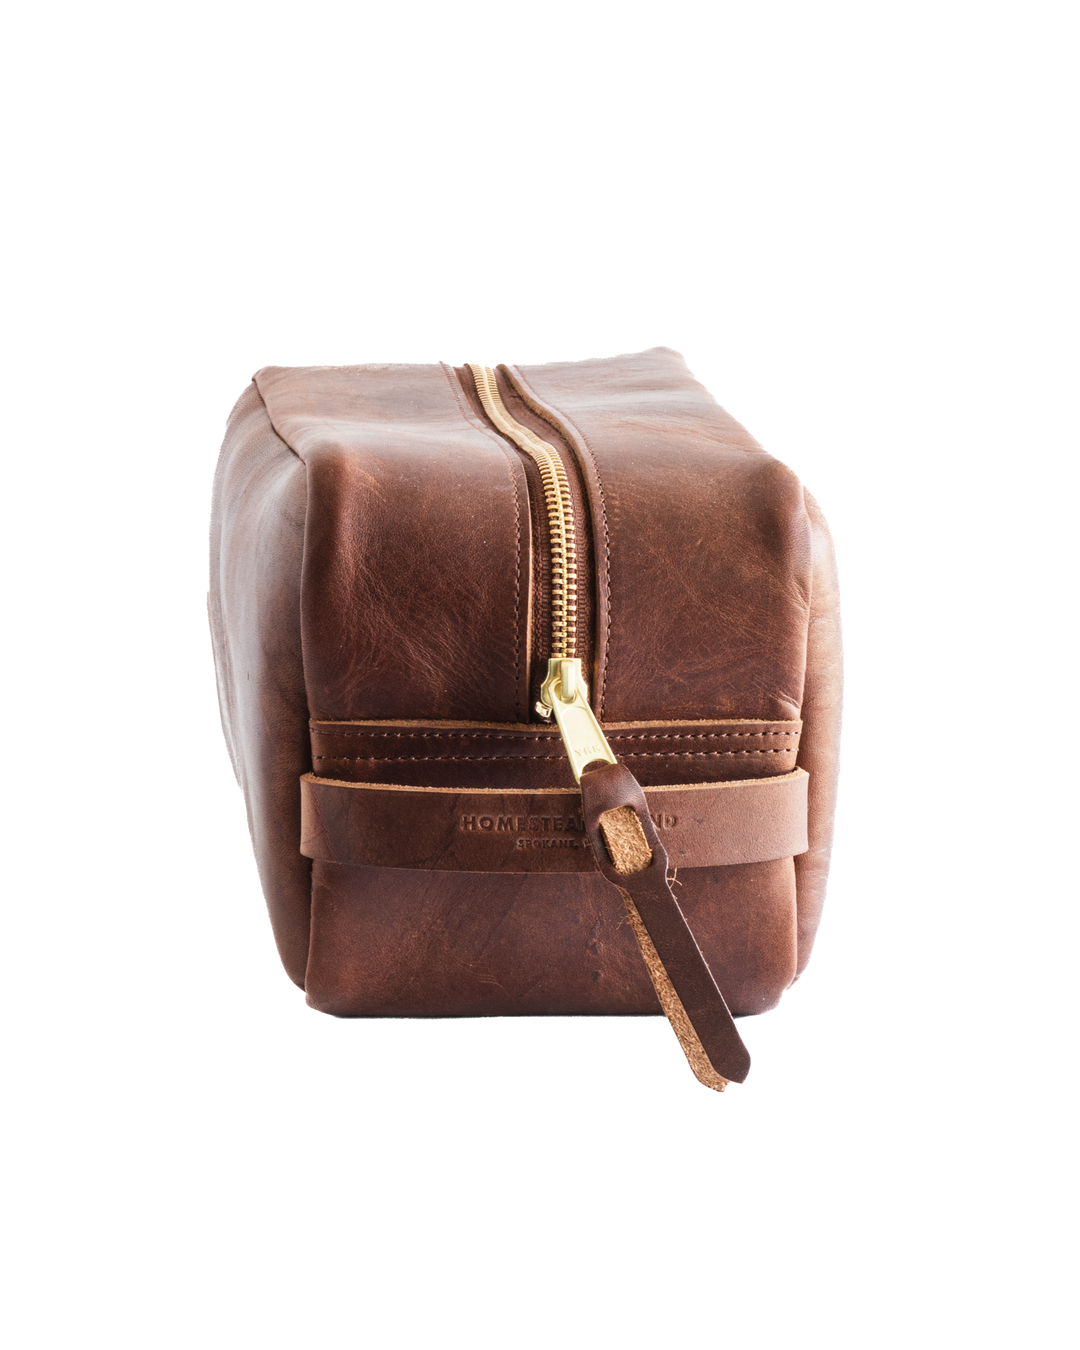 Dopp Kit Brown Side with Handle Closed White background